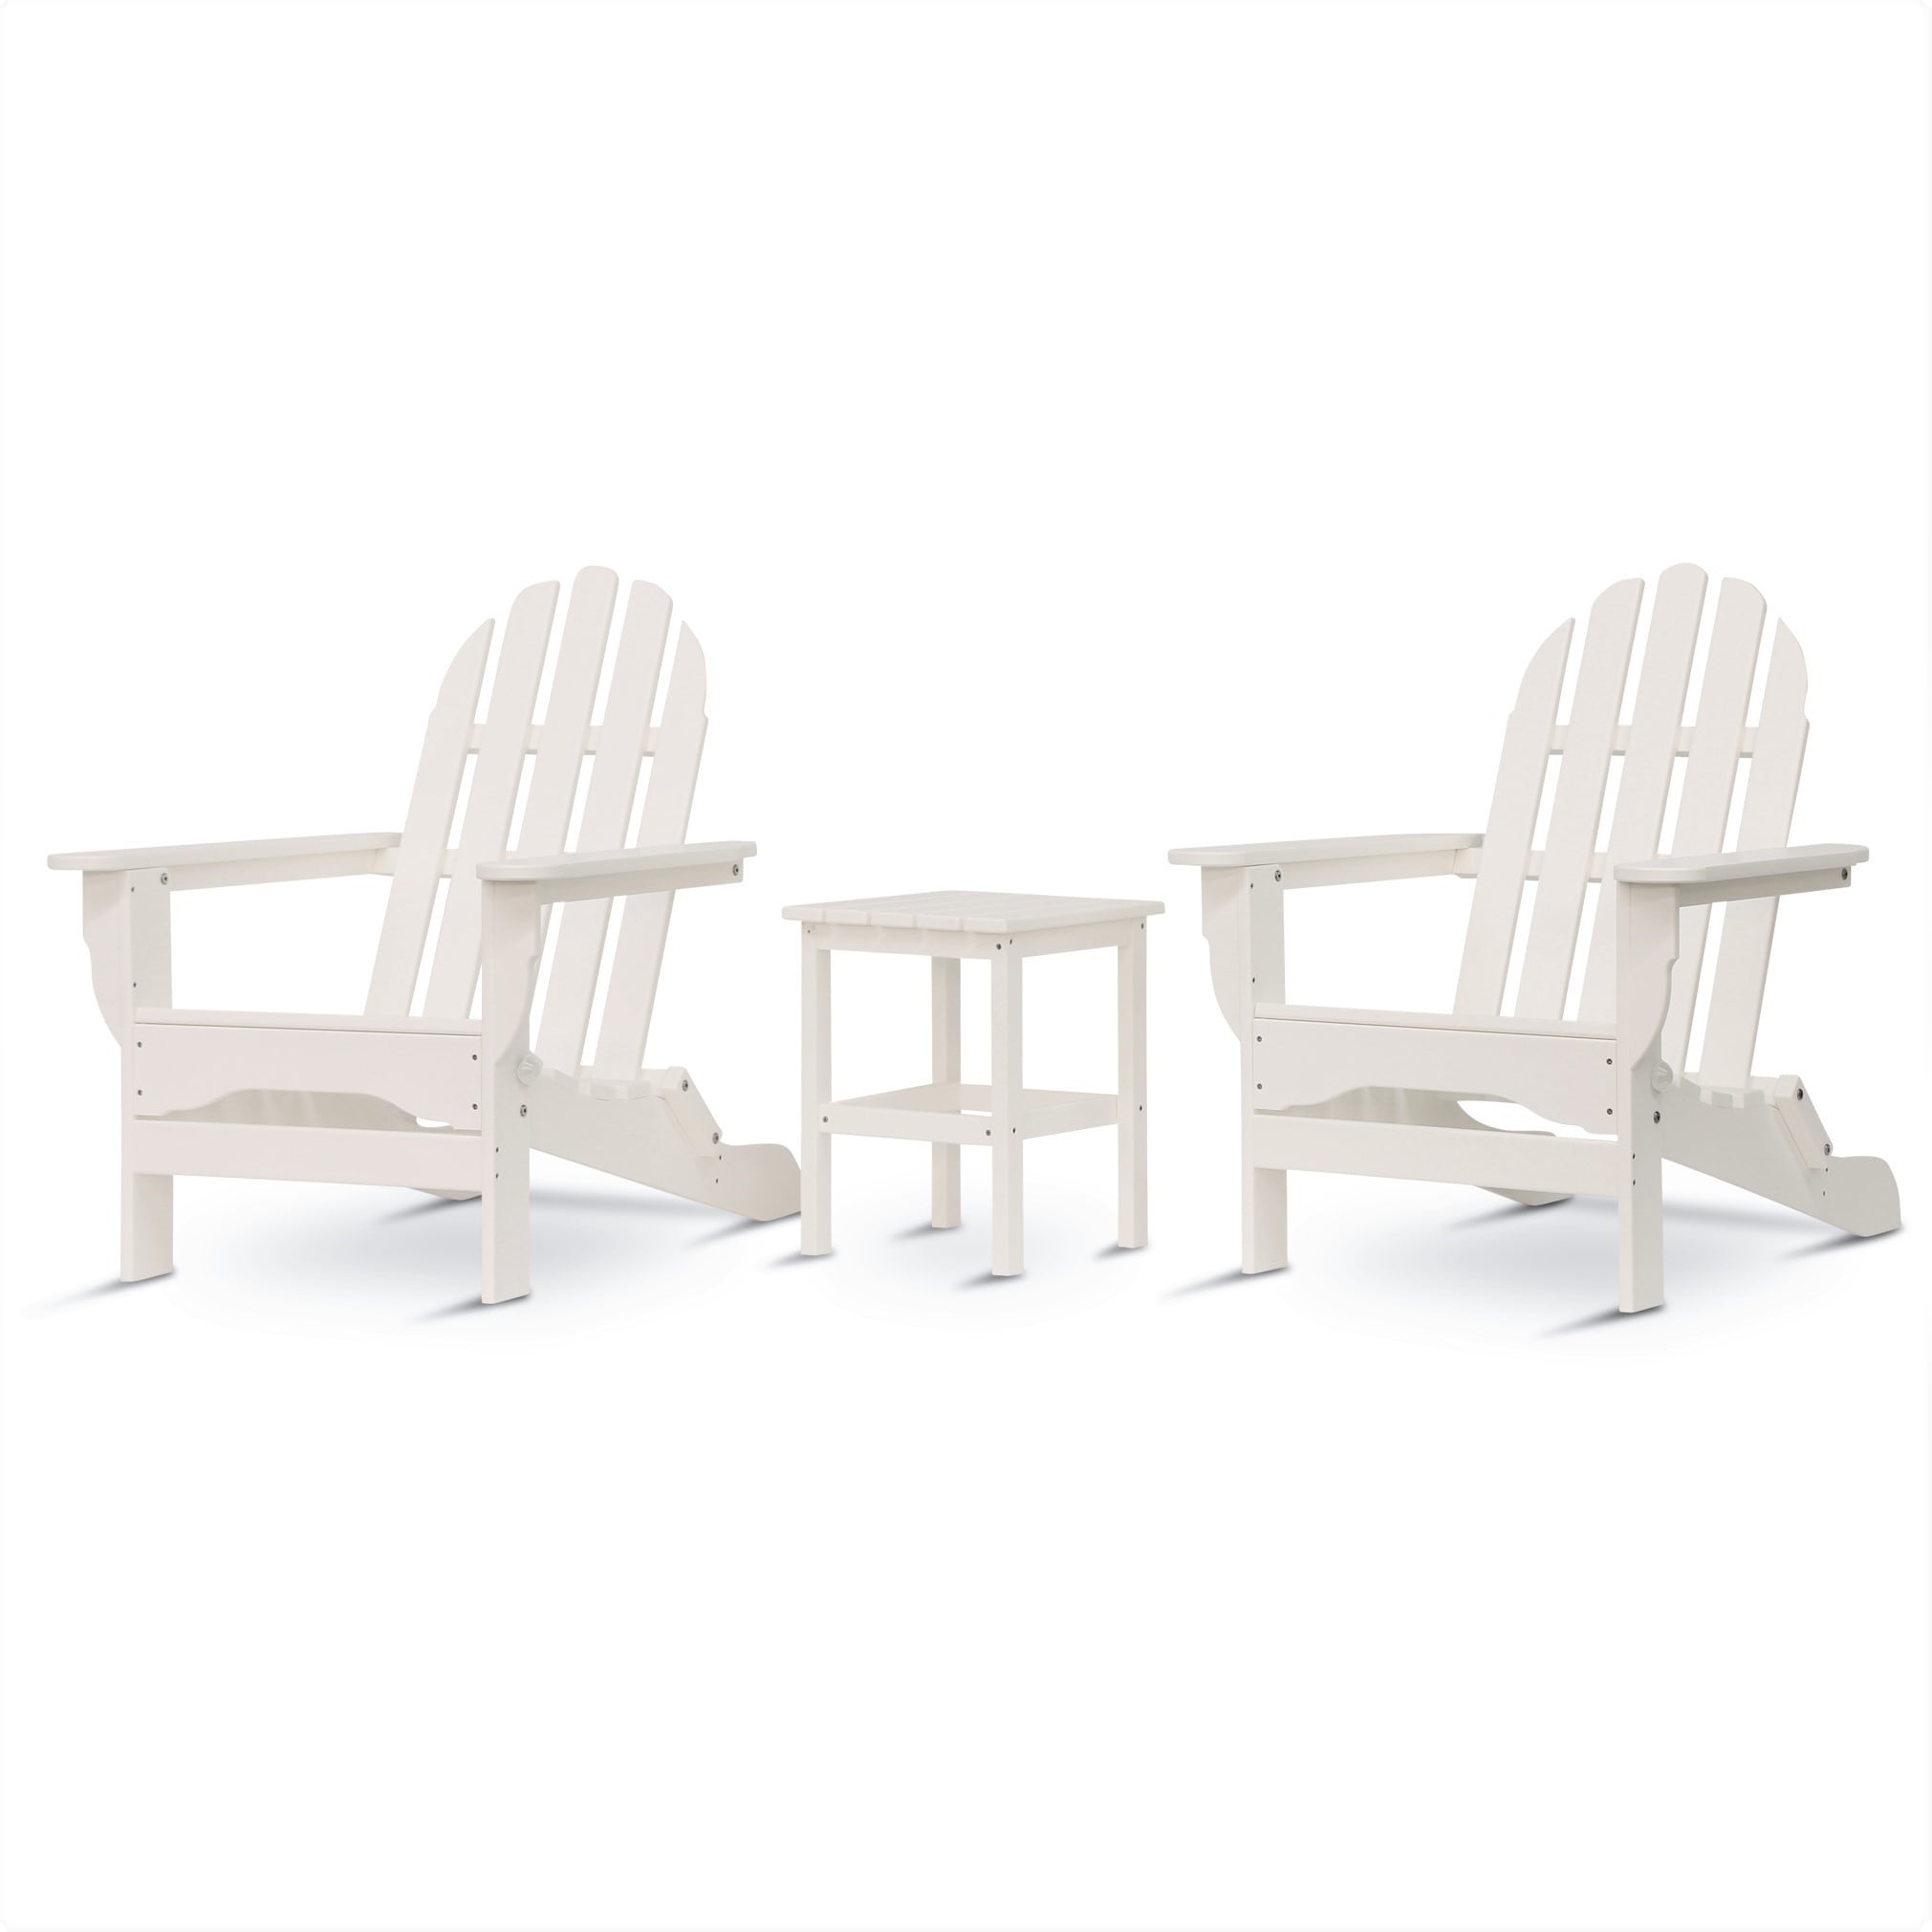 Nelson 3 Piece Recycled Plastic Folding Adirondack Chairs And Side Table Set By Havenside Home